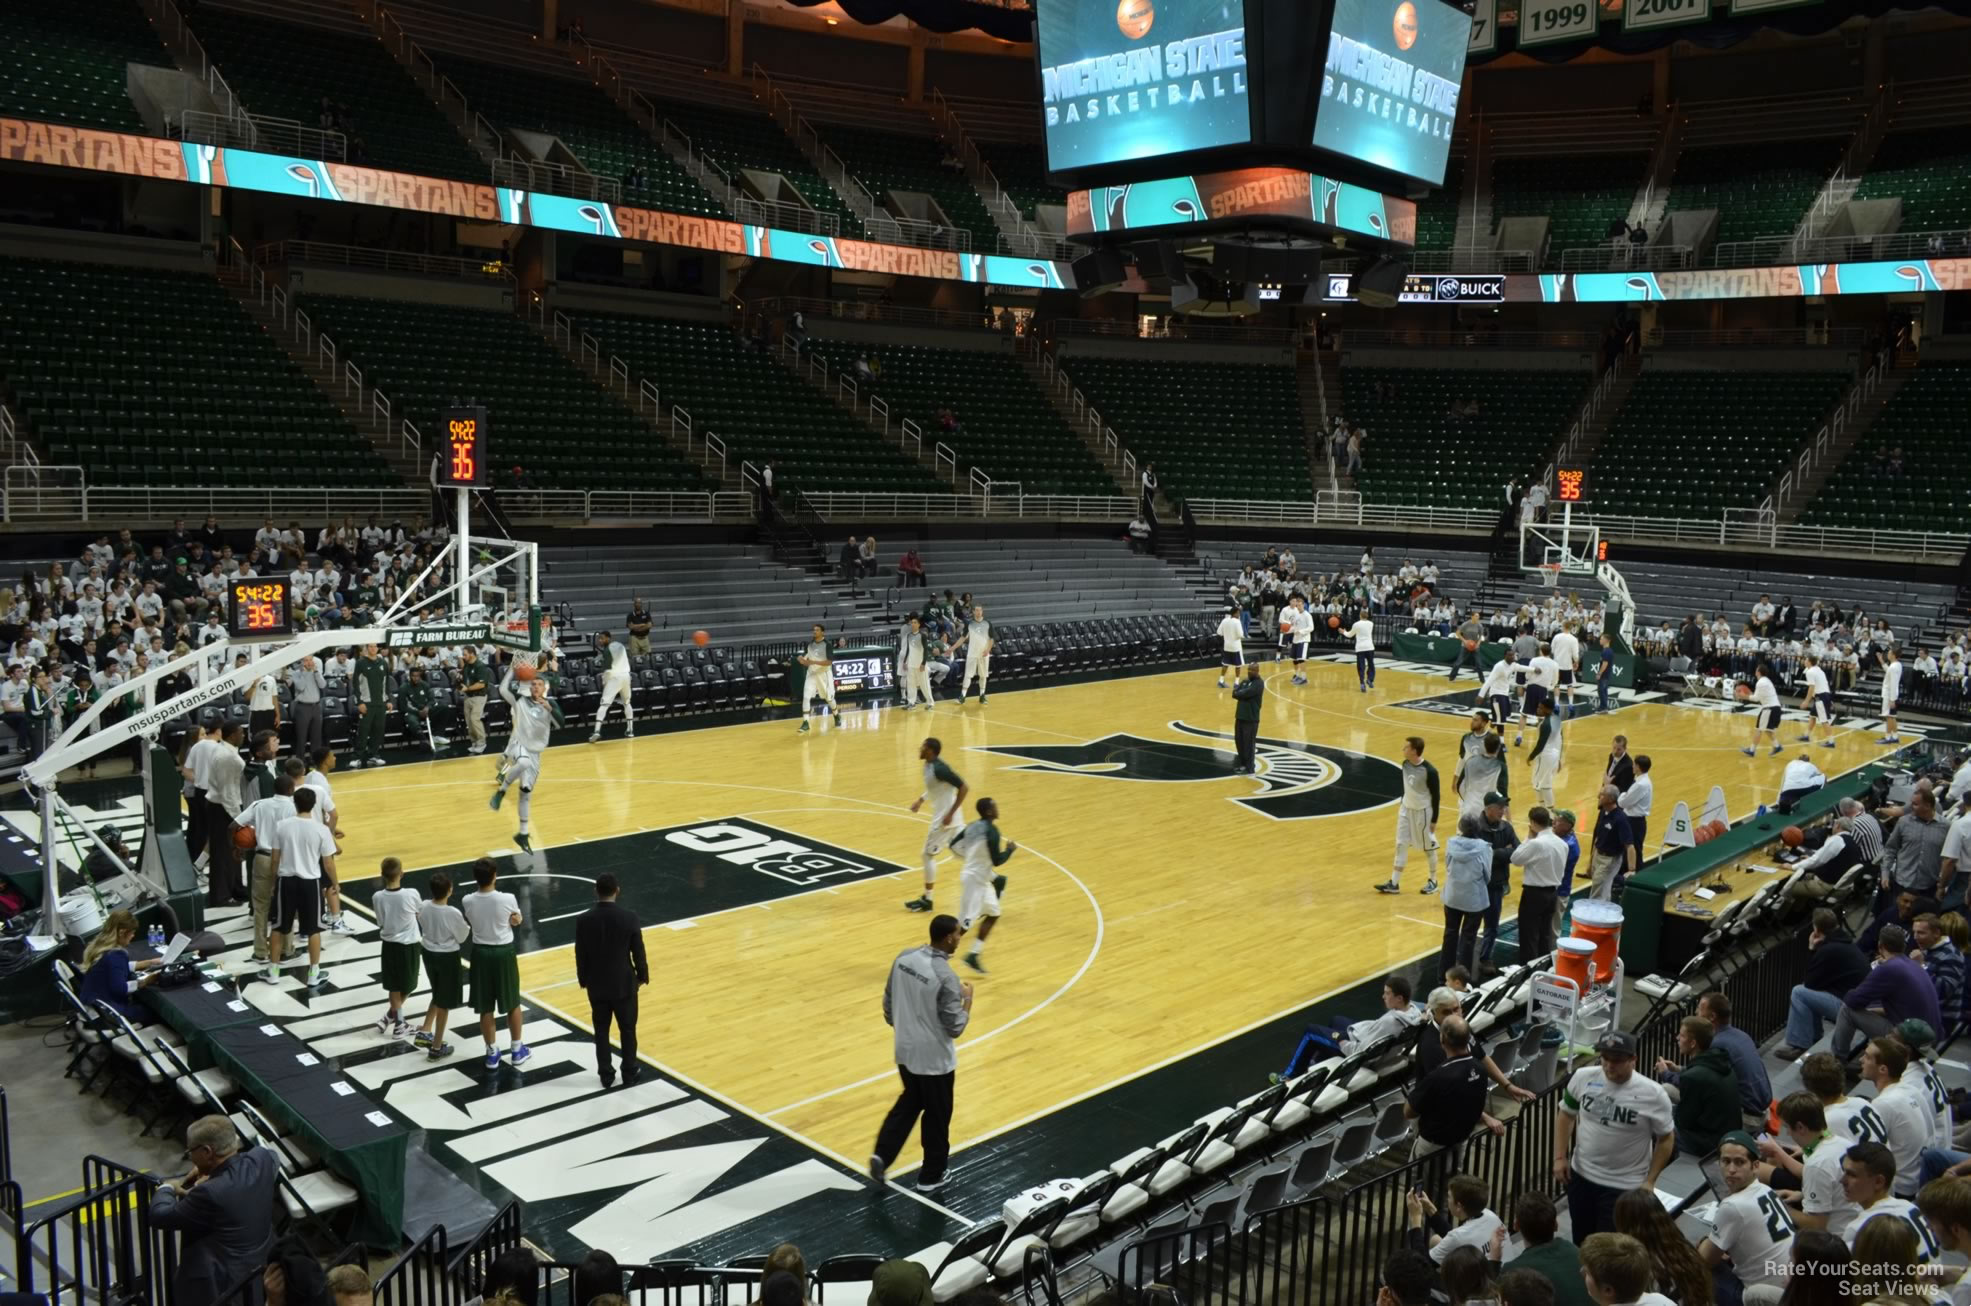 section 115, row 13 seat view  - breslin center